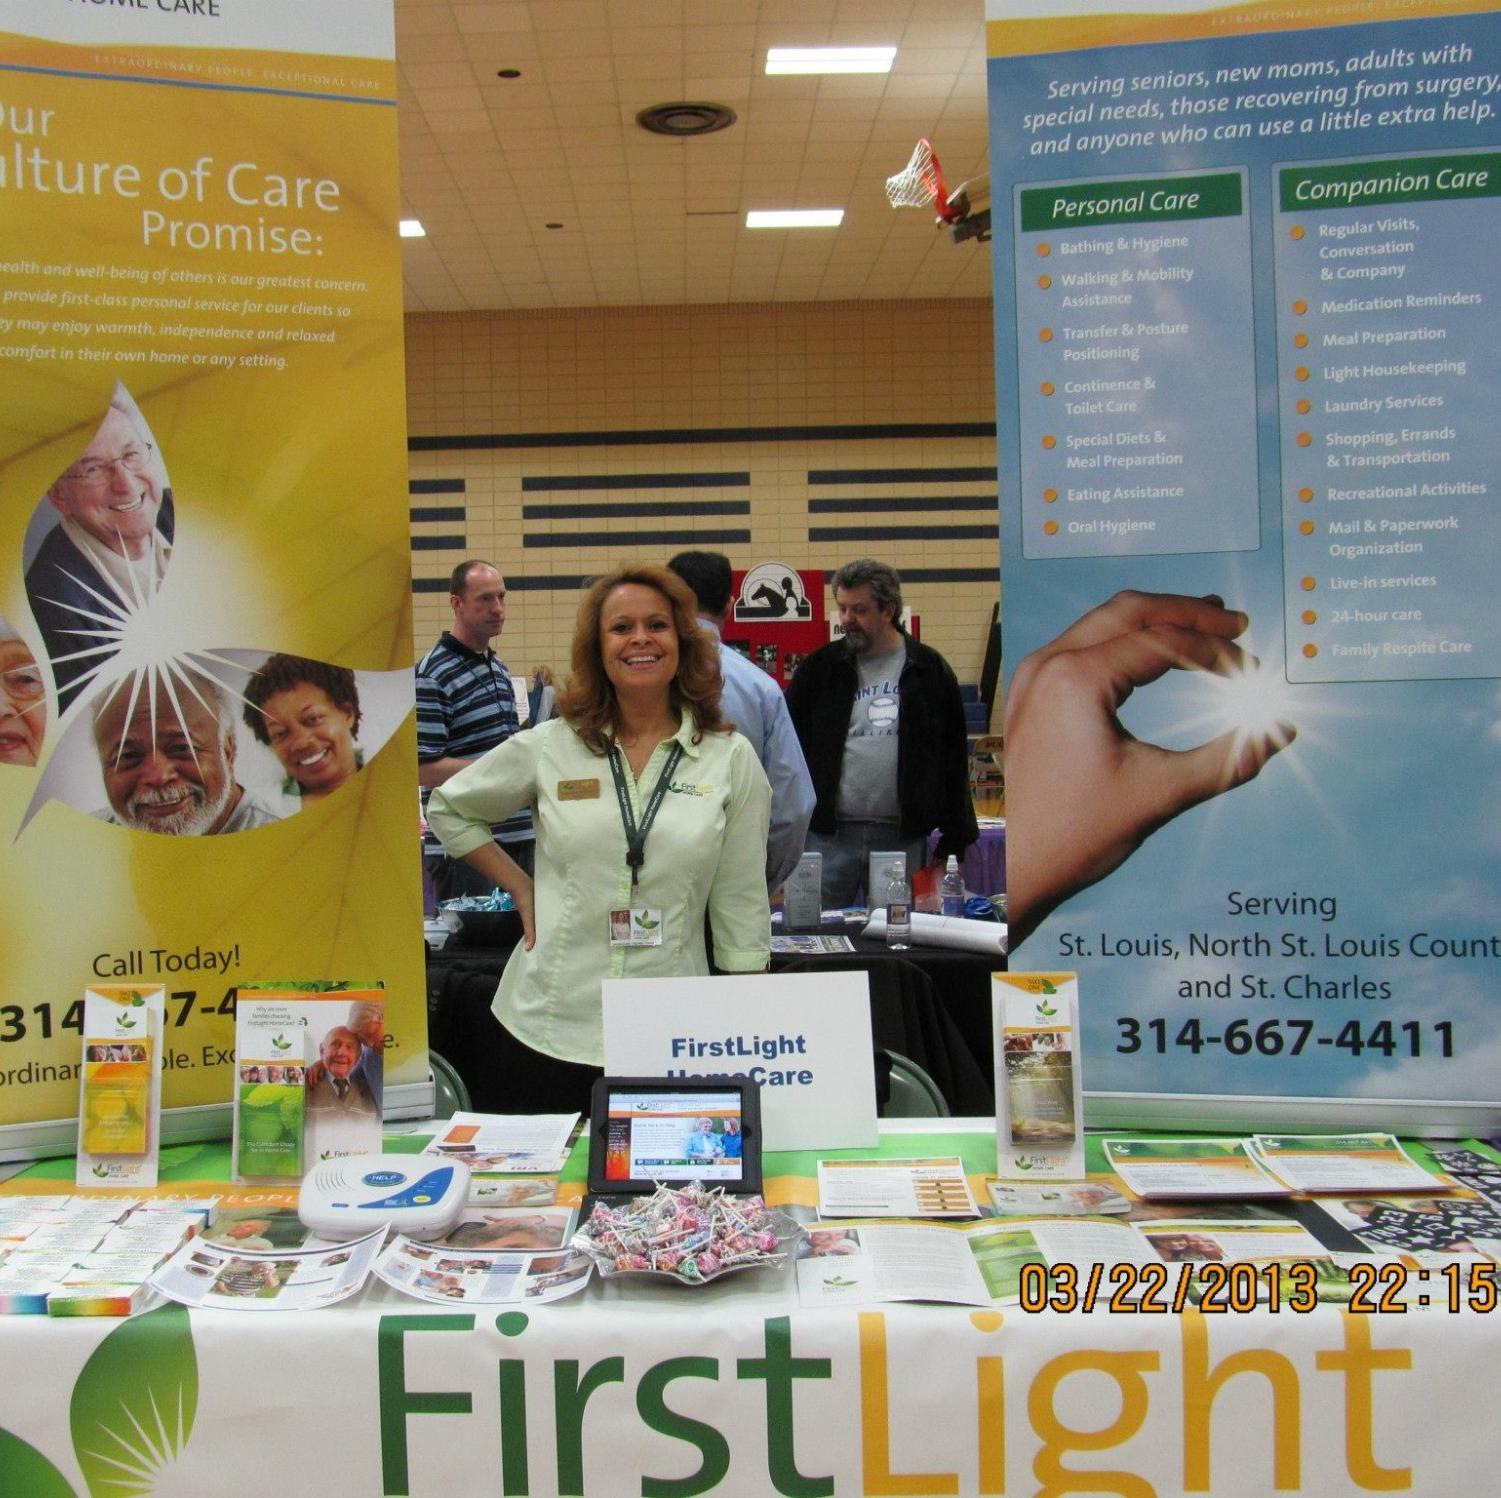 First Light Home Care Photo